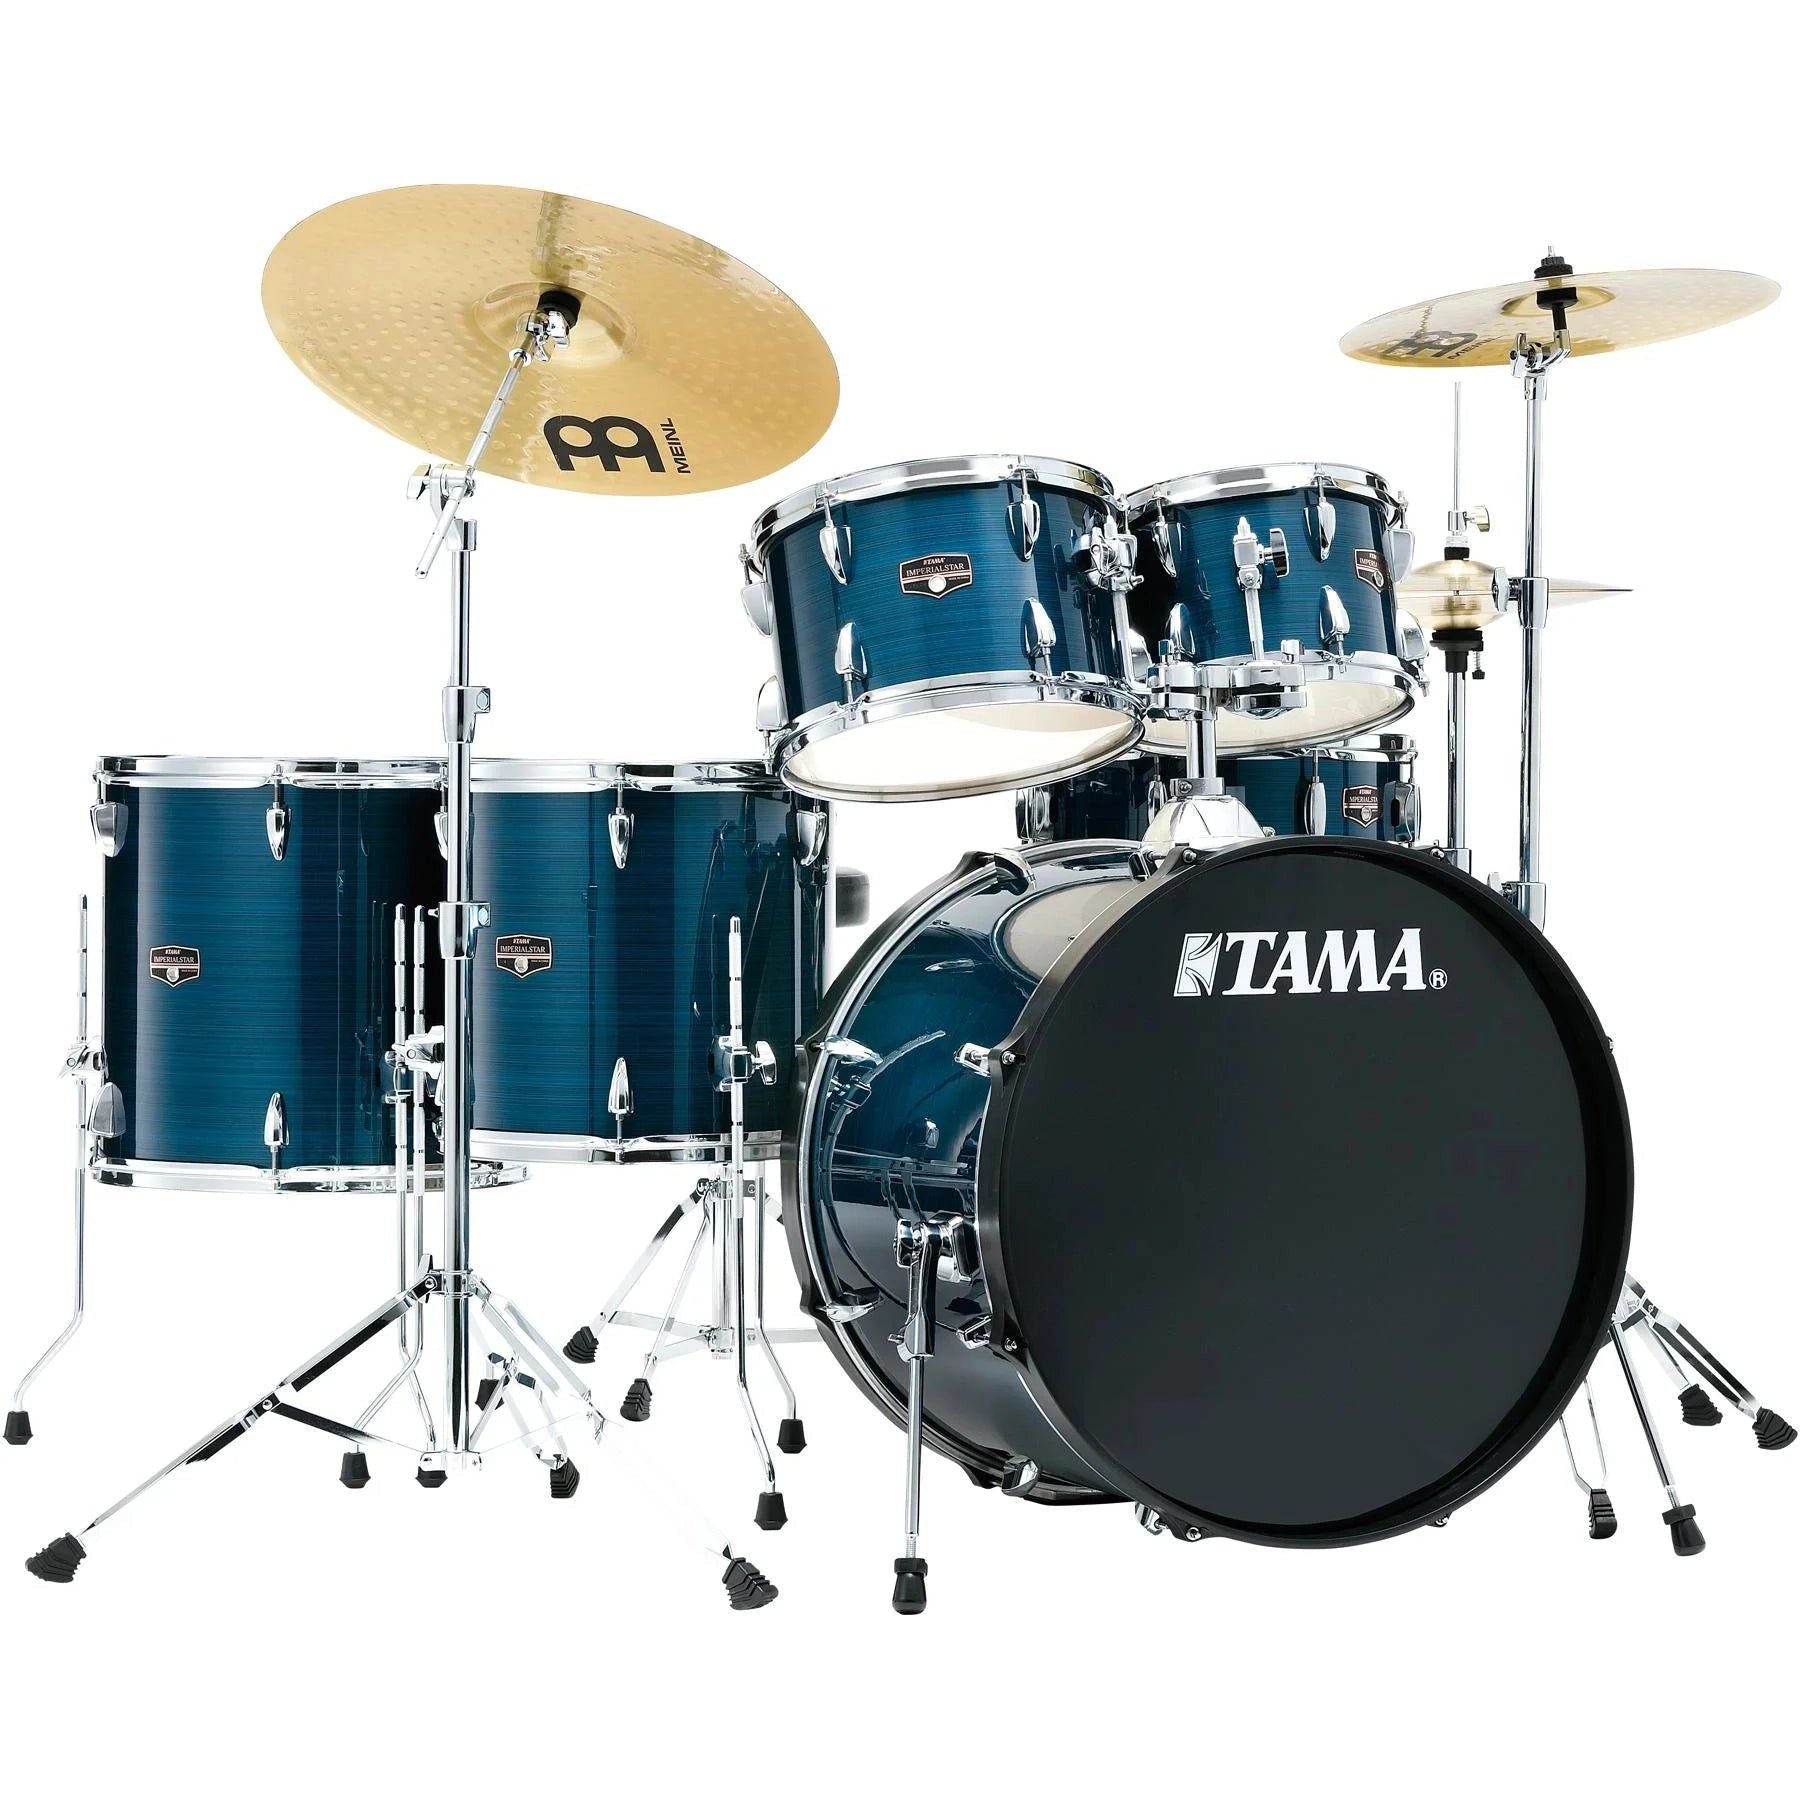 Trống Cơ Tama imperialstar IE62C (22/10-12/14-16/14 + Cymbal), Accu-Tune Hoop - Việt Music